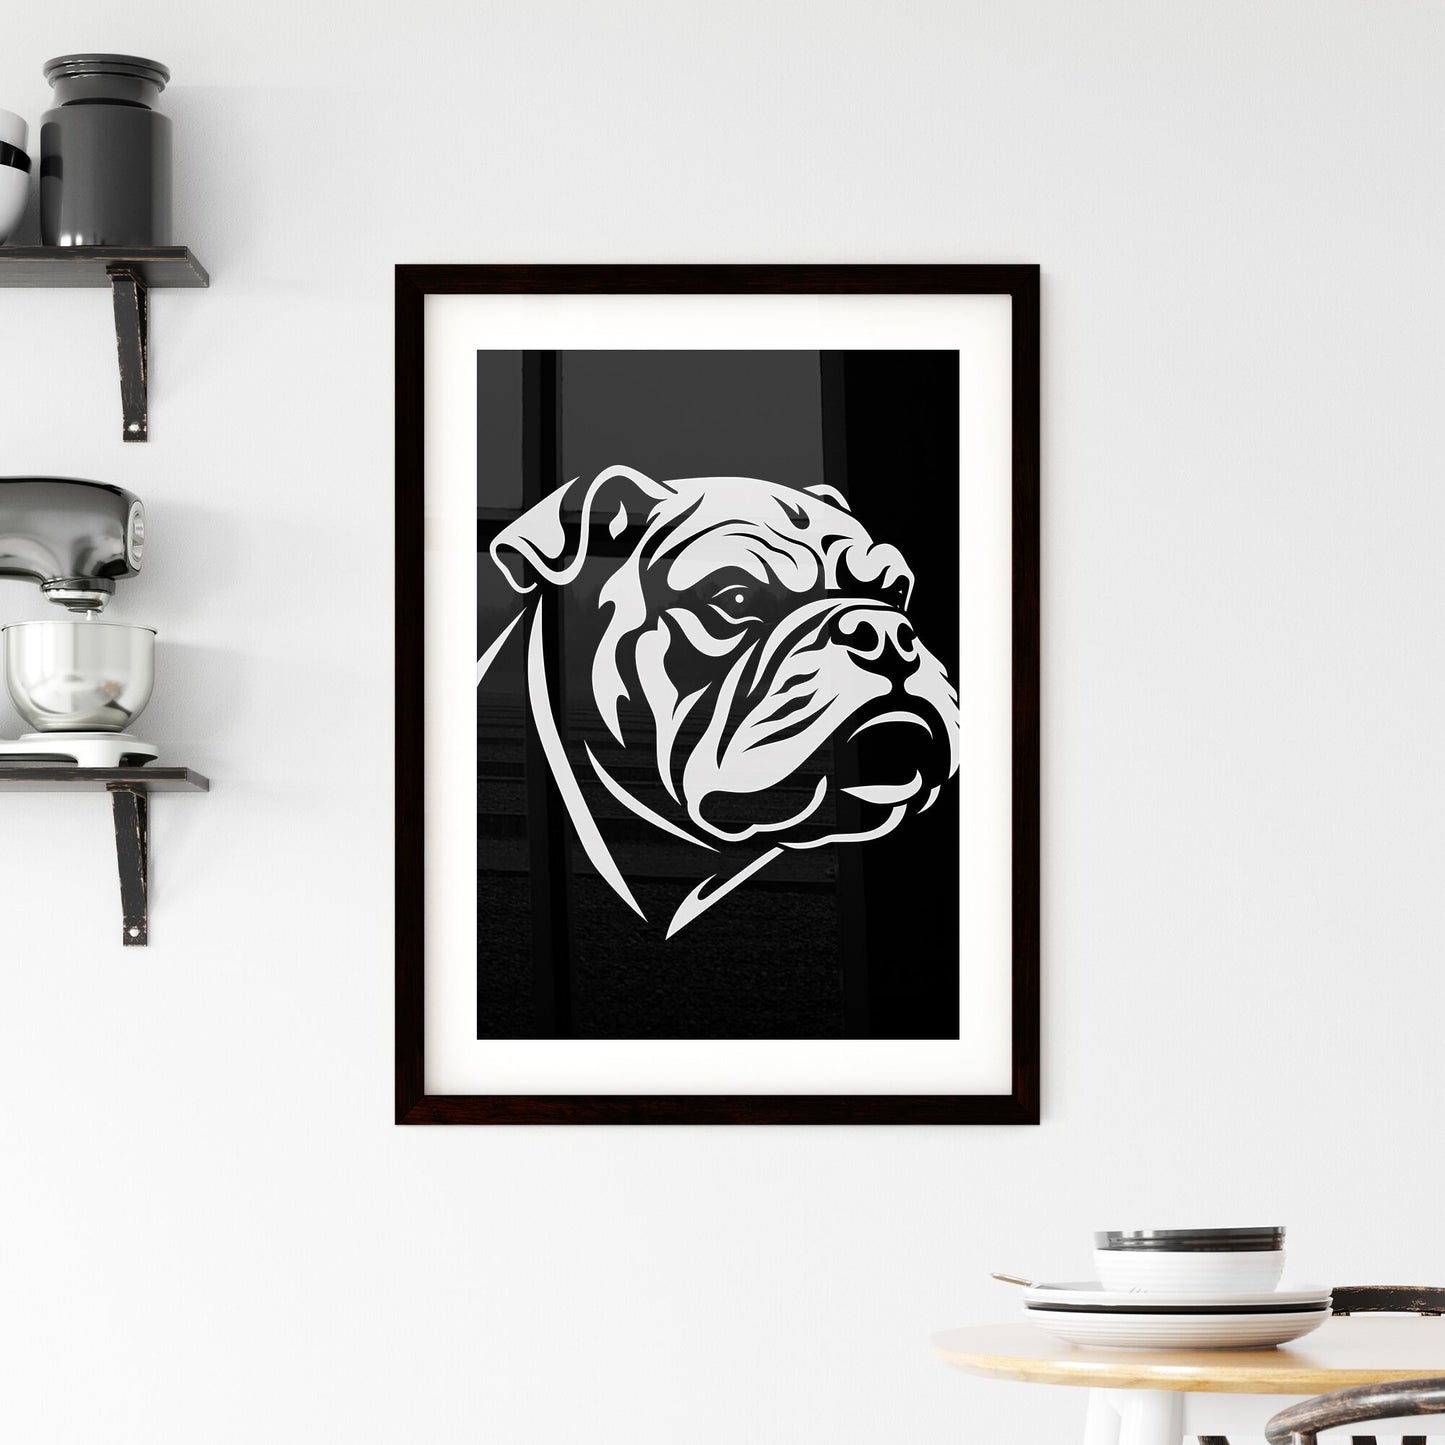 Painterly Bulldog Mascot Logo in Black and White with Bold Lines on Transparent Background Default Title